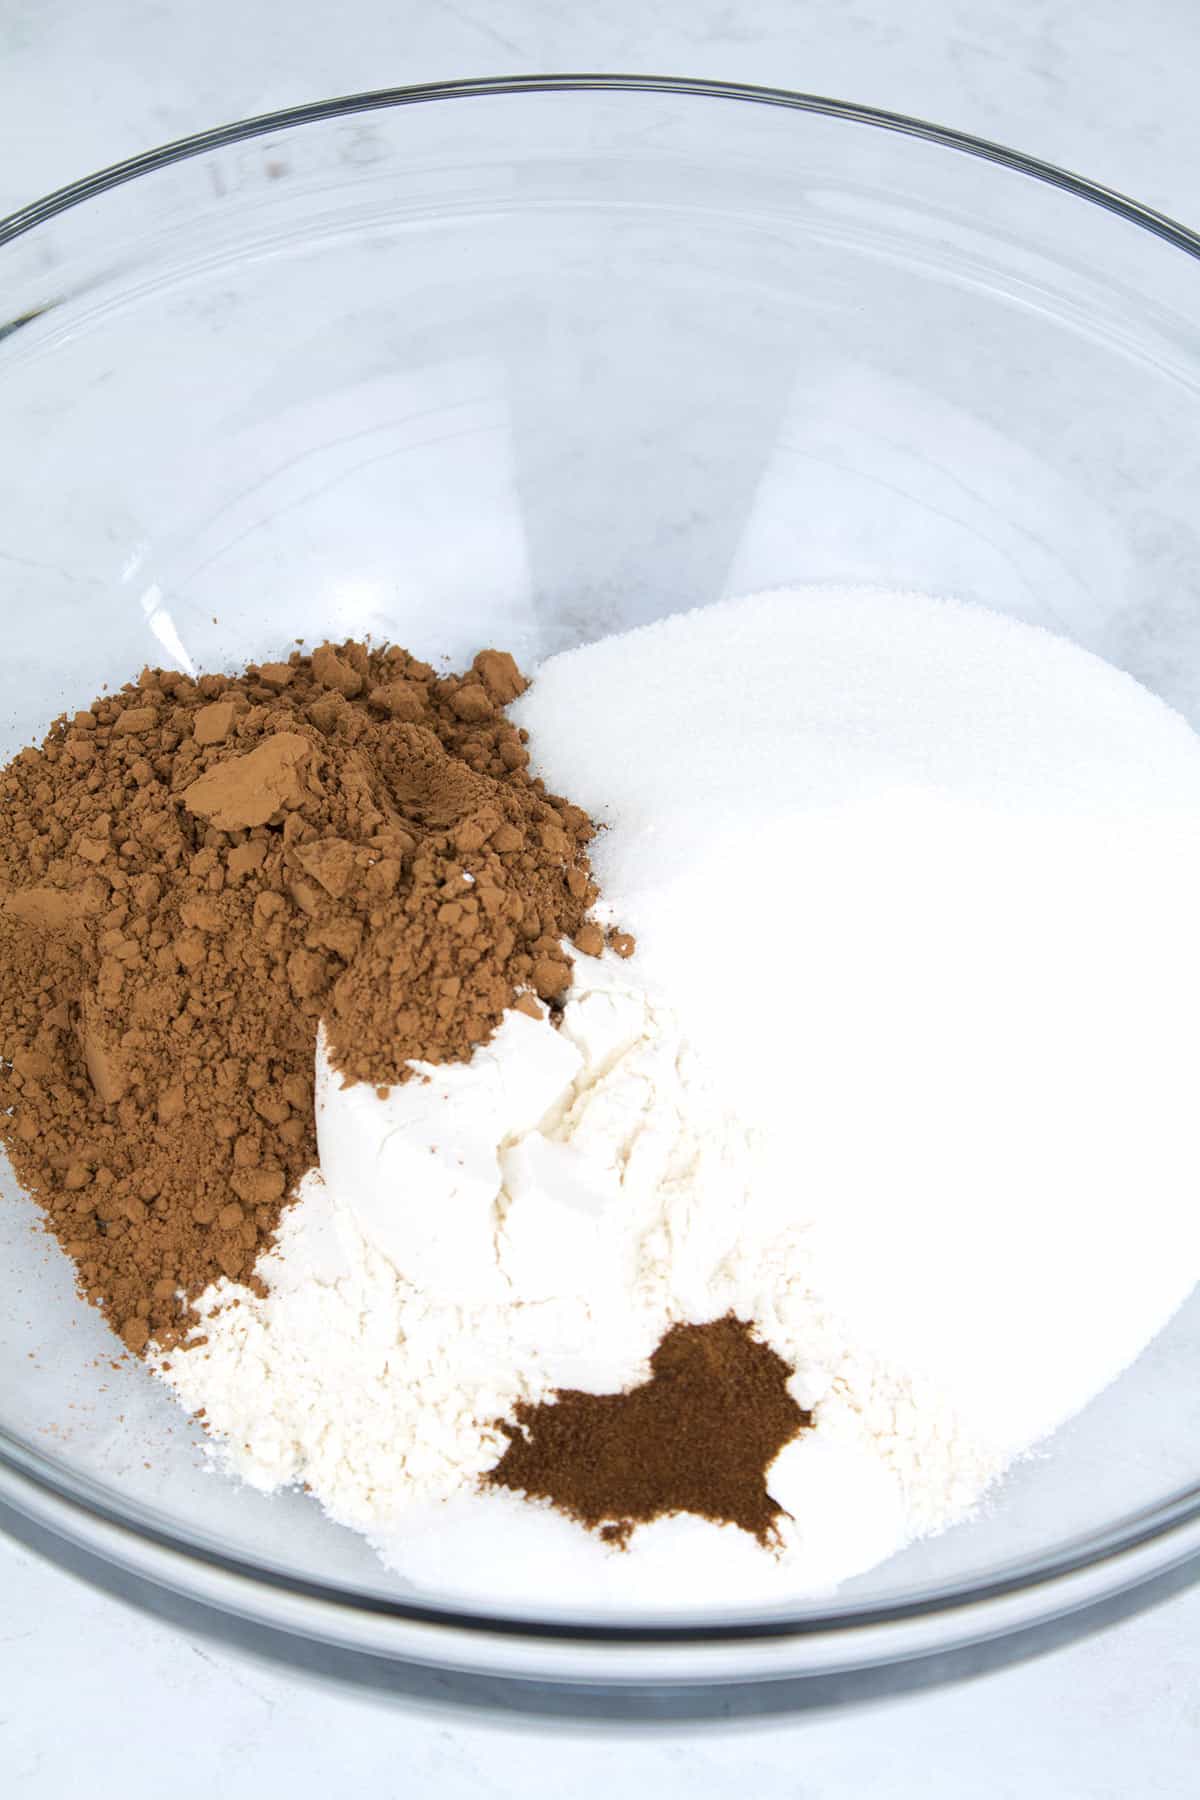 Dry ingredients for cake batter unmixed in a clear glass bowl.